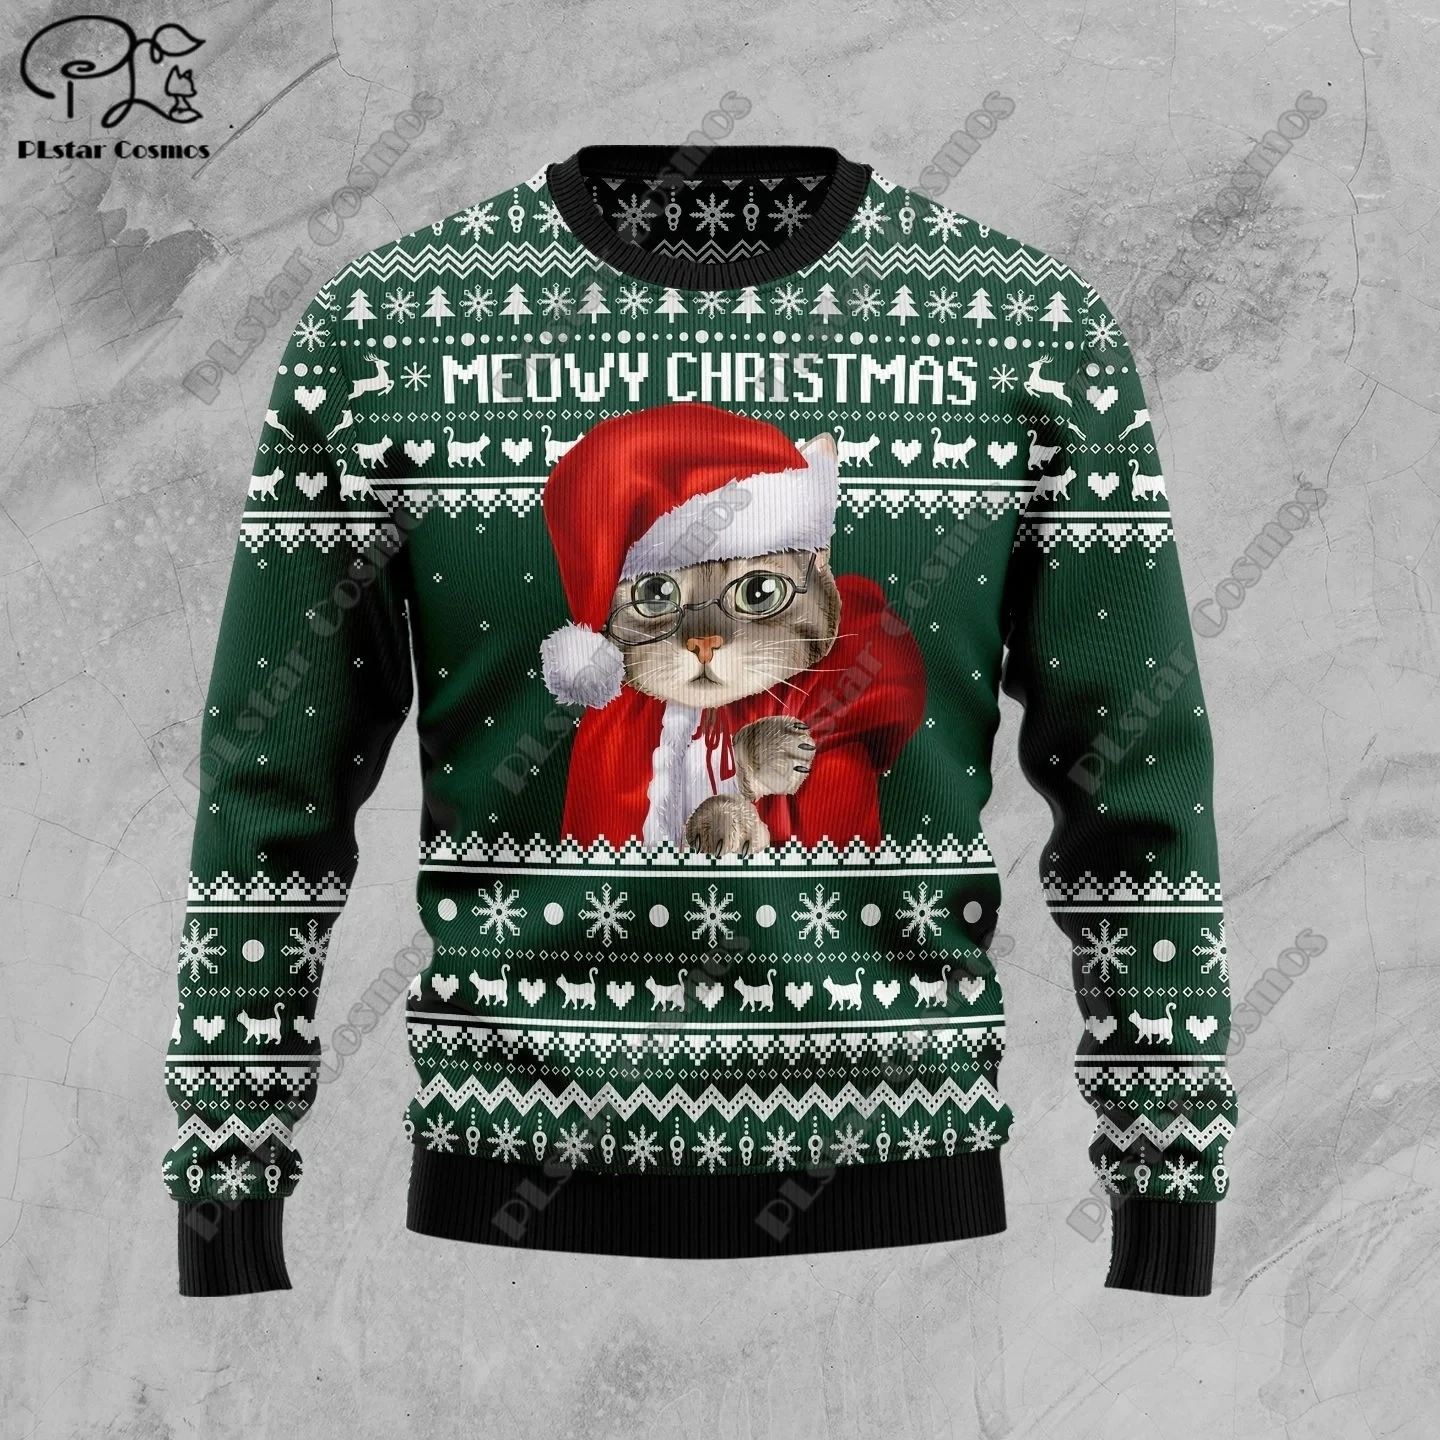 New 3D printed Christmas elements Christmas tree Santa Claus pattern art print ugly sweater street casual winter sweater S-3 new 3d printed christmas elements christmas tree santa claus pattern art print ugly sweater street casual winter sweater s 15